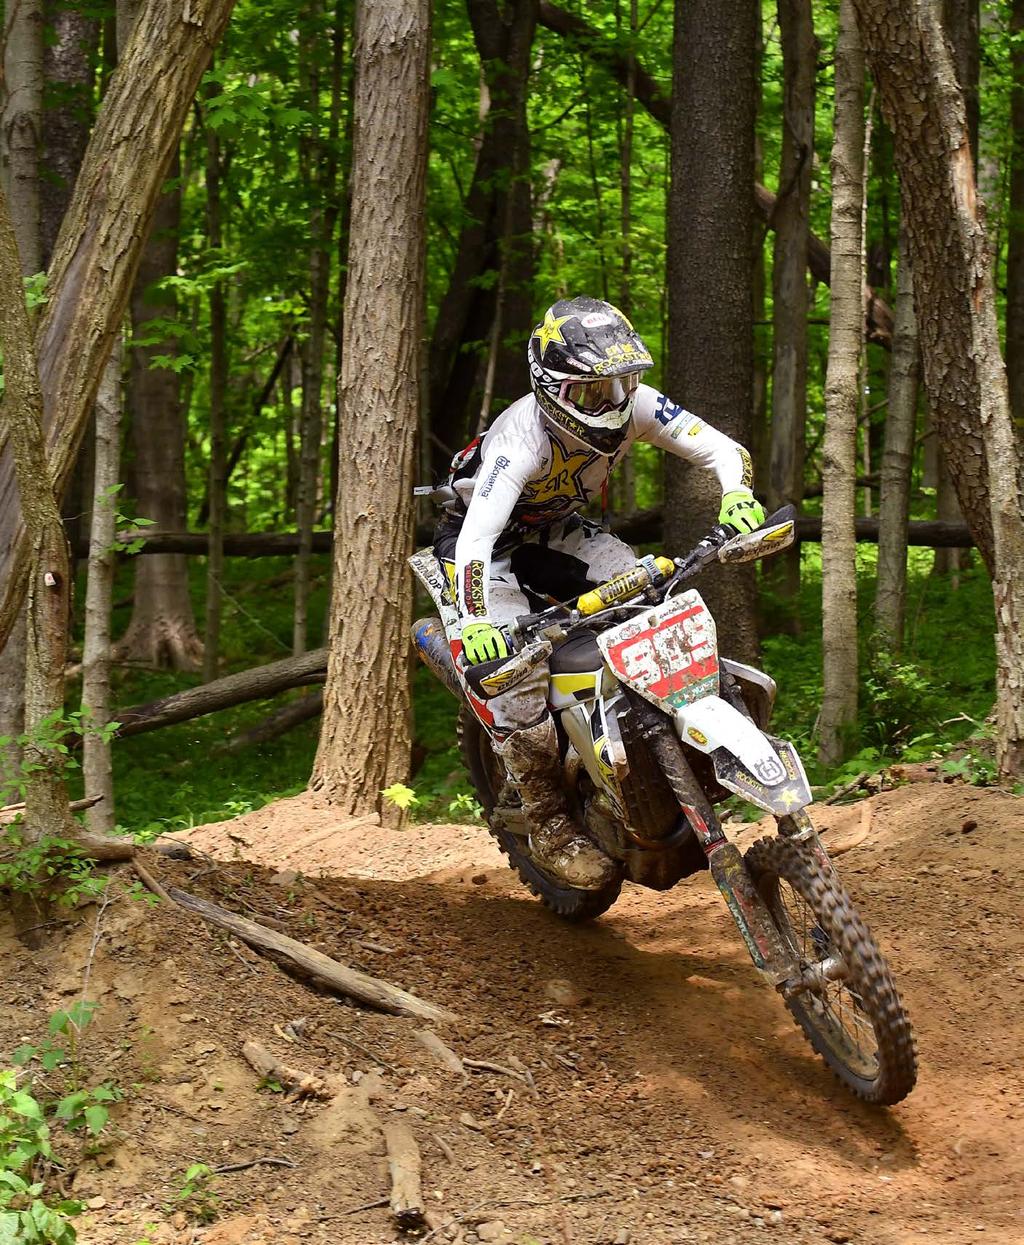 ROUND 6 / MAY 13, 2018 X-FACTOR WHITETAILS HUNTING RANCH / PERU, INDIANA OFF-ROAD AMSOIL GRAND NATIONAL CROSS COUNTRY SERIES P78 During the second hour, Steward Baylor s brother, and Tely Energy